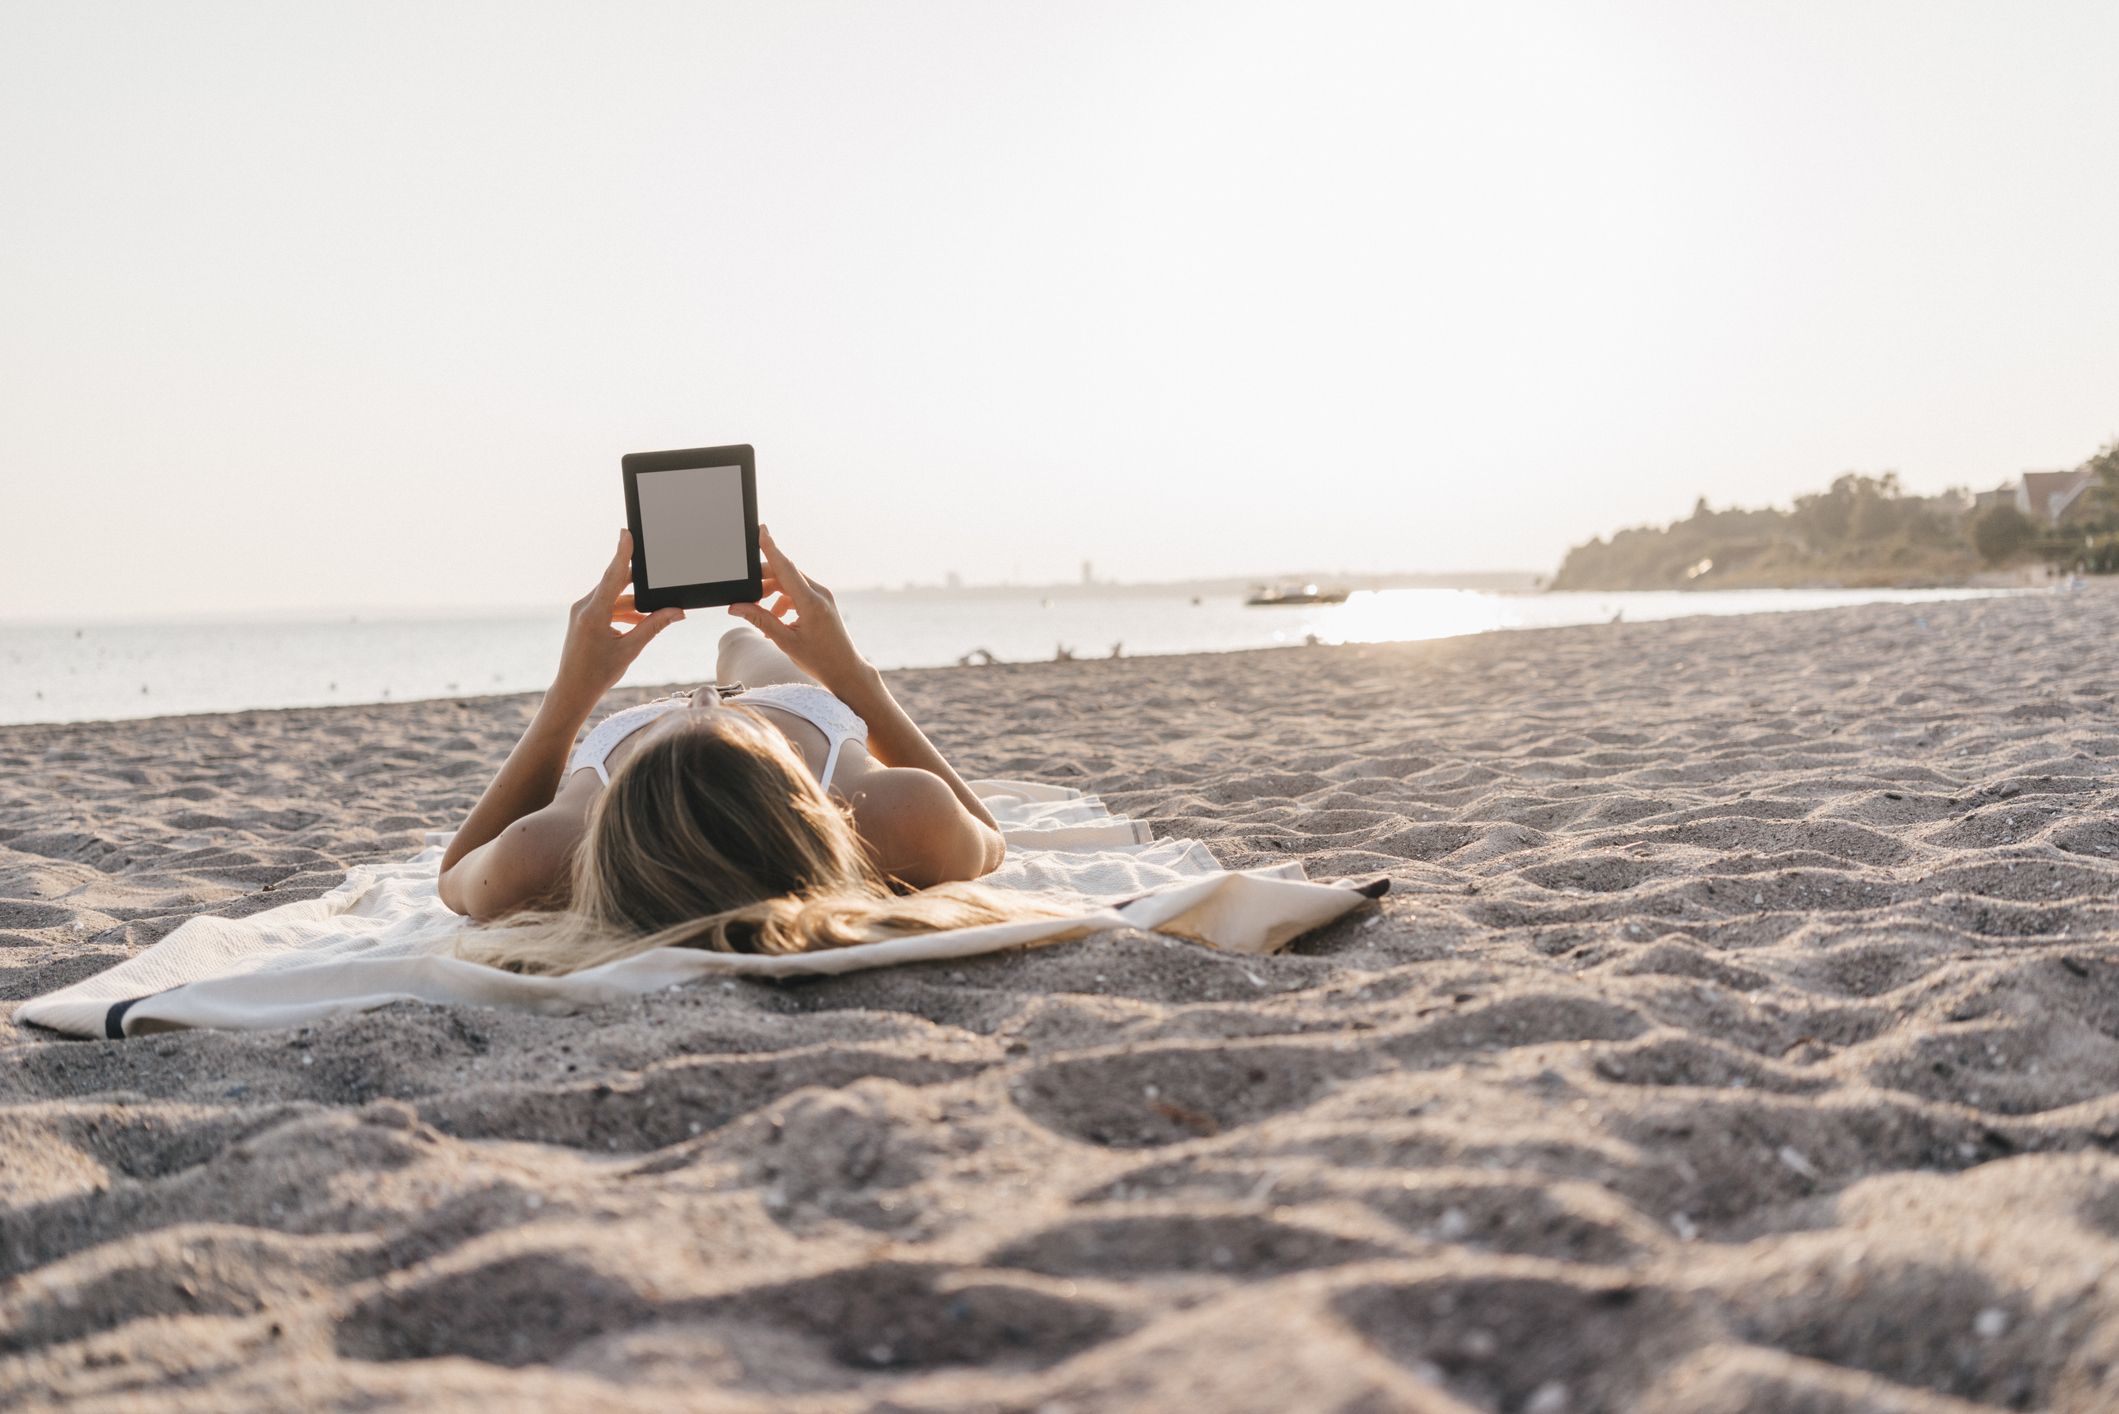 The Best Completely Free Kindle Books for 2022